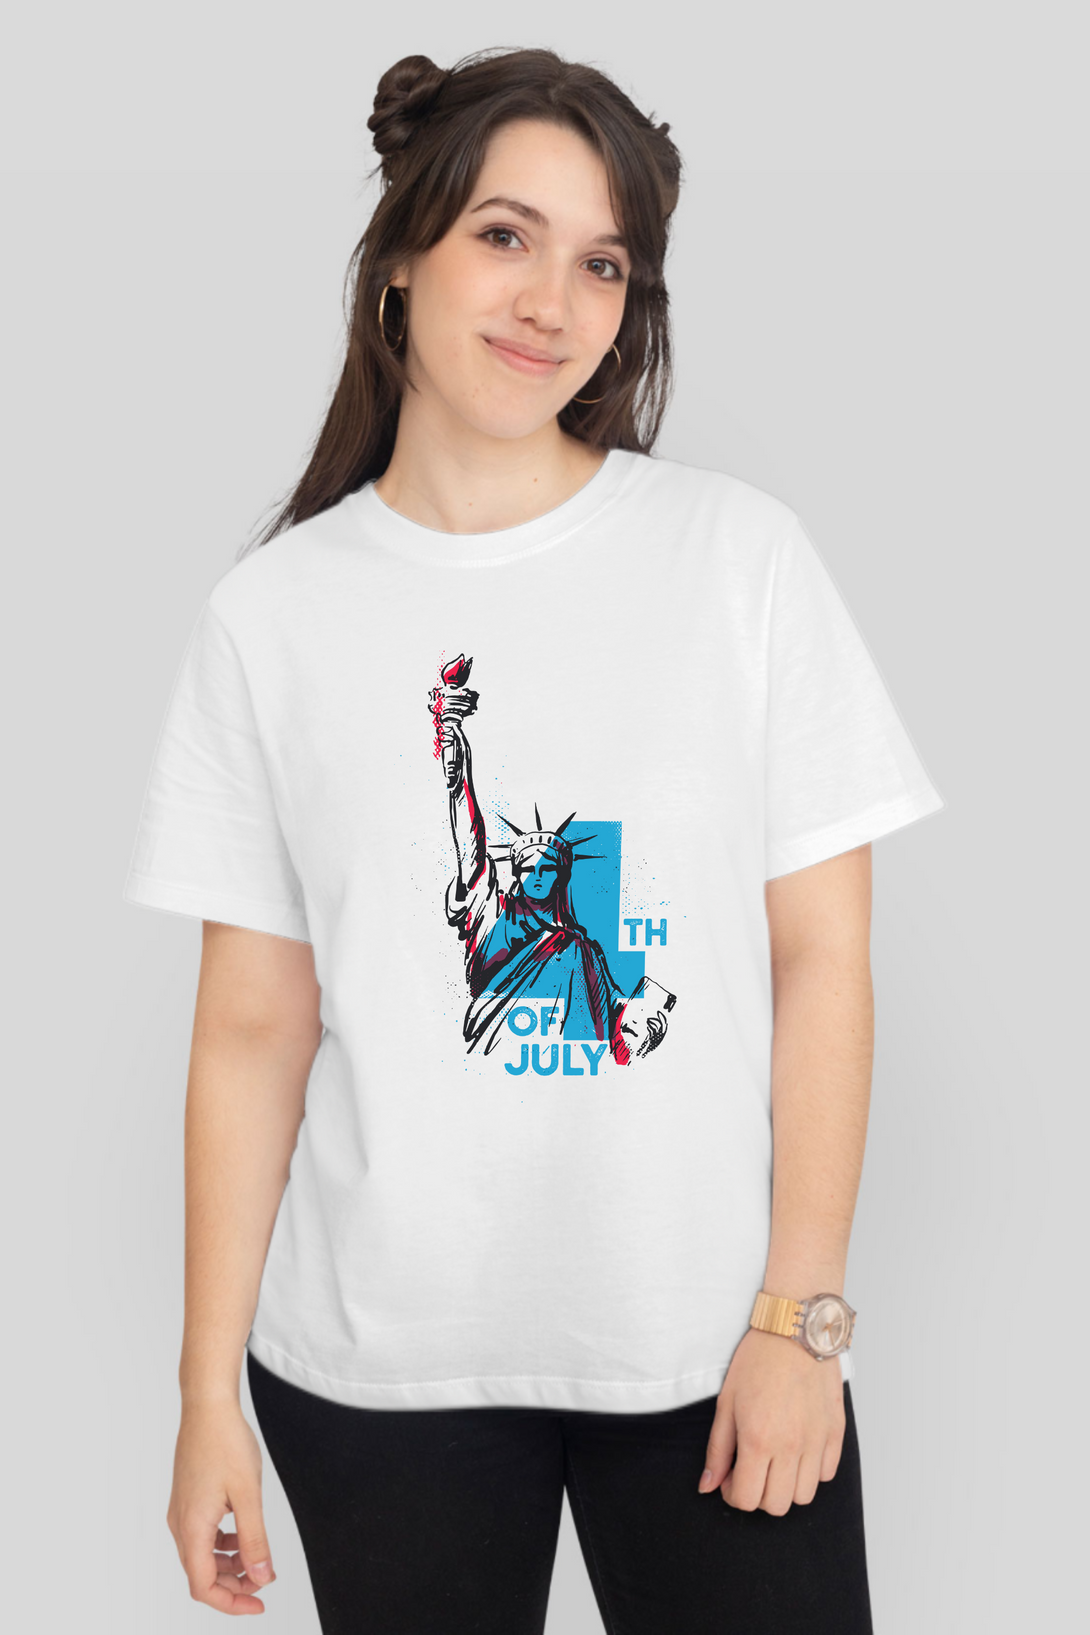 Statue Of Liberty Vintage Printed T-Shirt For Women - WowWaves - 8